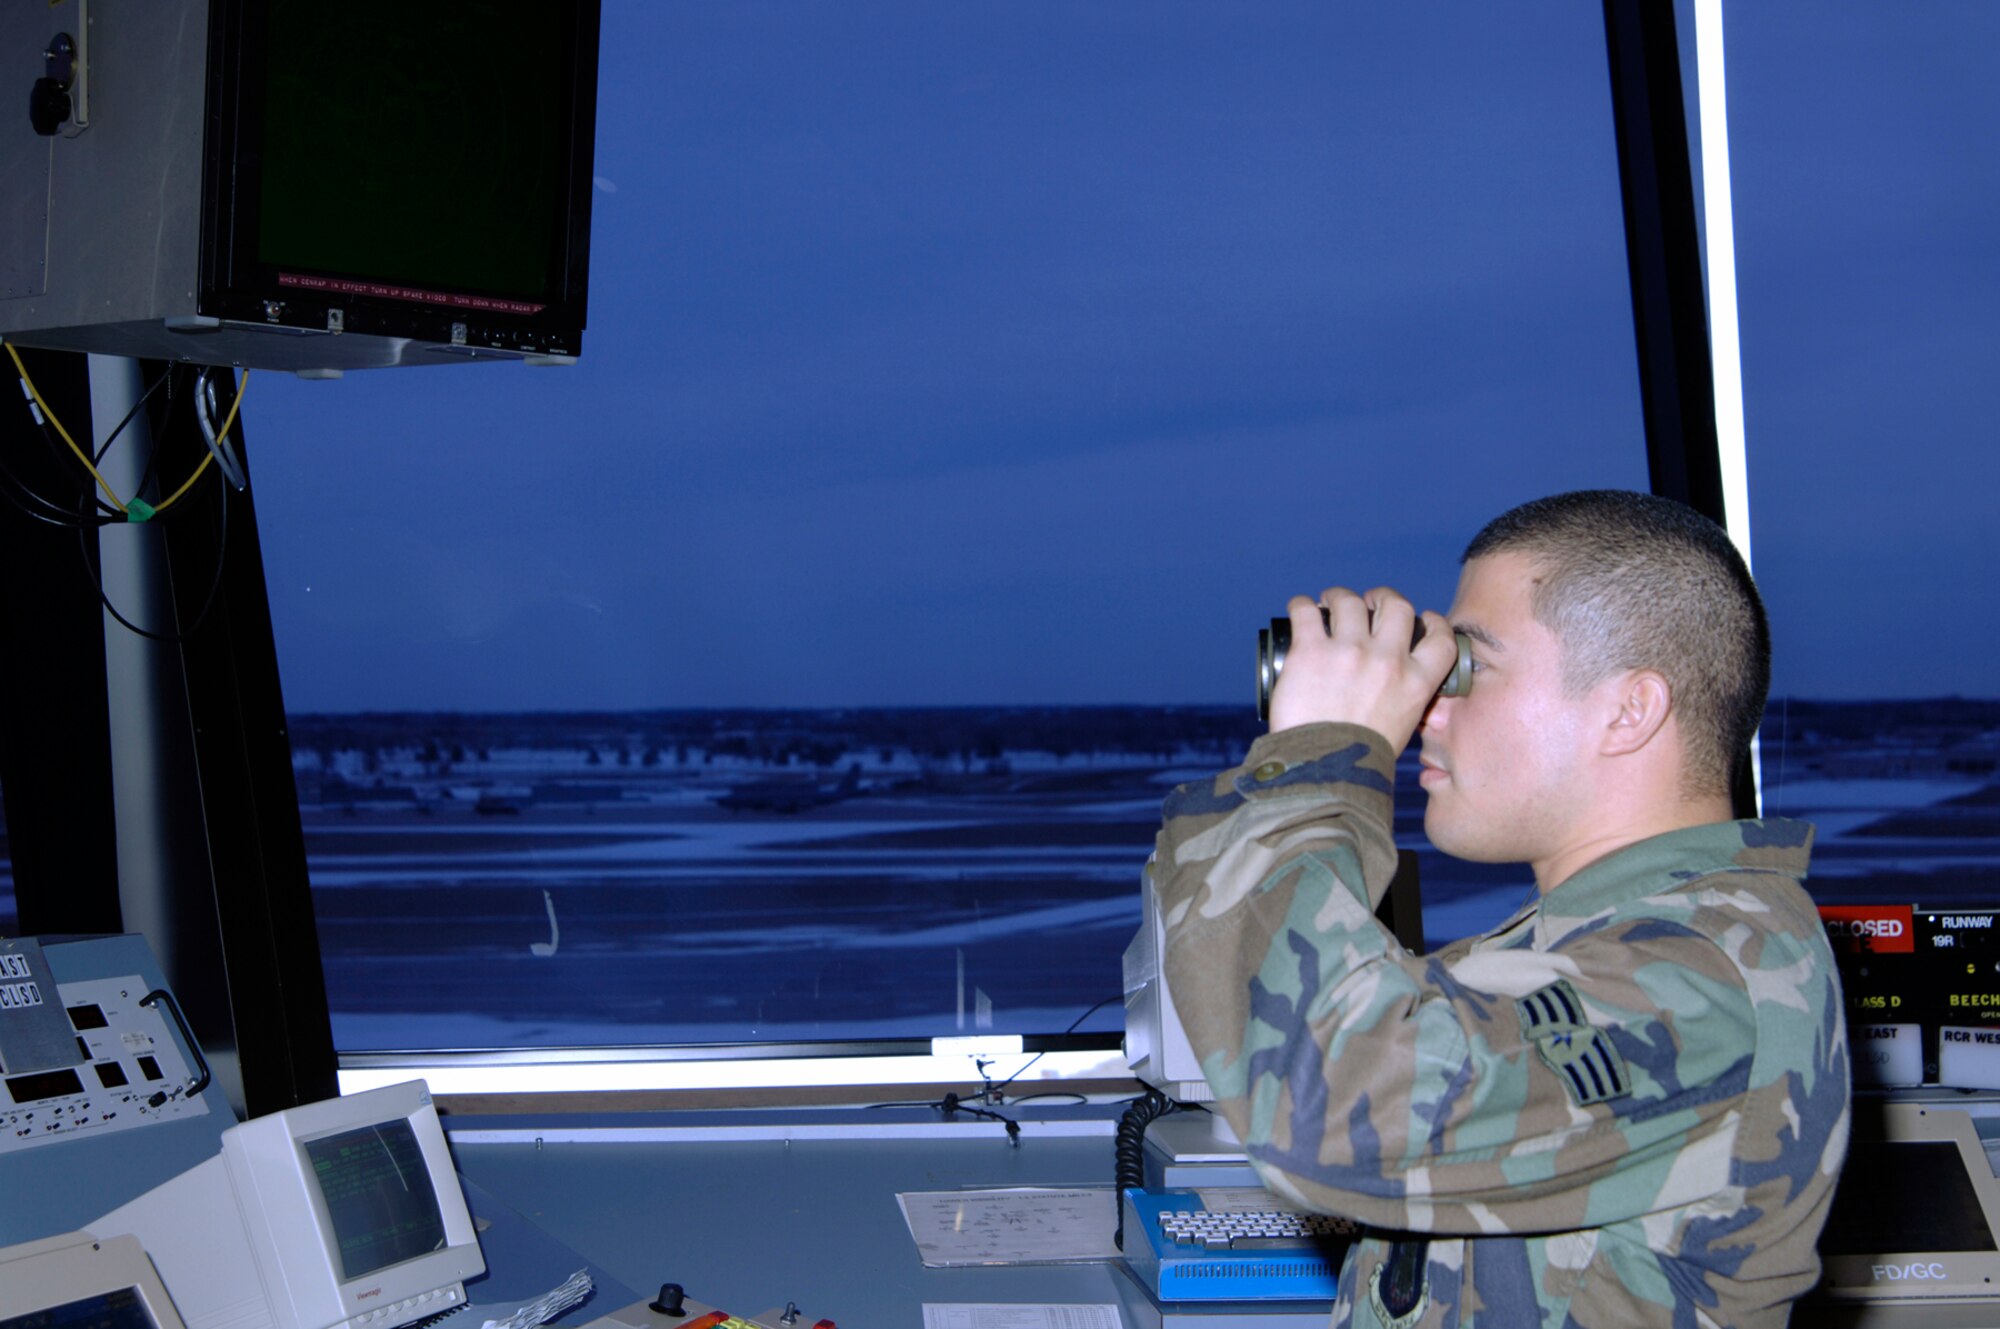 Senior Airman Briant Bell, 22nd Operation Support Squadron air traffic controller, works the air traffic control tower Jan. 18. Air traffic controllers here monitor aircraft in order to prevent accidents. They direct the movement of aircraft into and out of McConnell’s airfield. They track aircraft by radar and relay information to aircrews via radio. They relay flight and landing instructions, weather reports and safety information to pilots.  